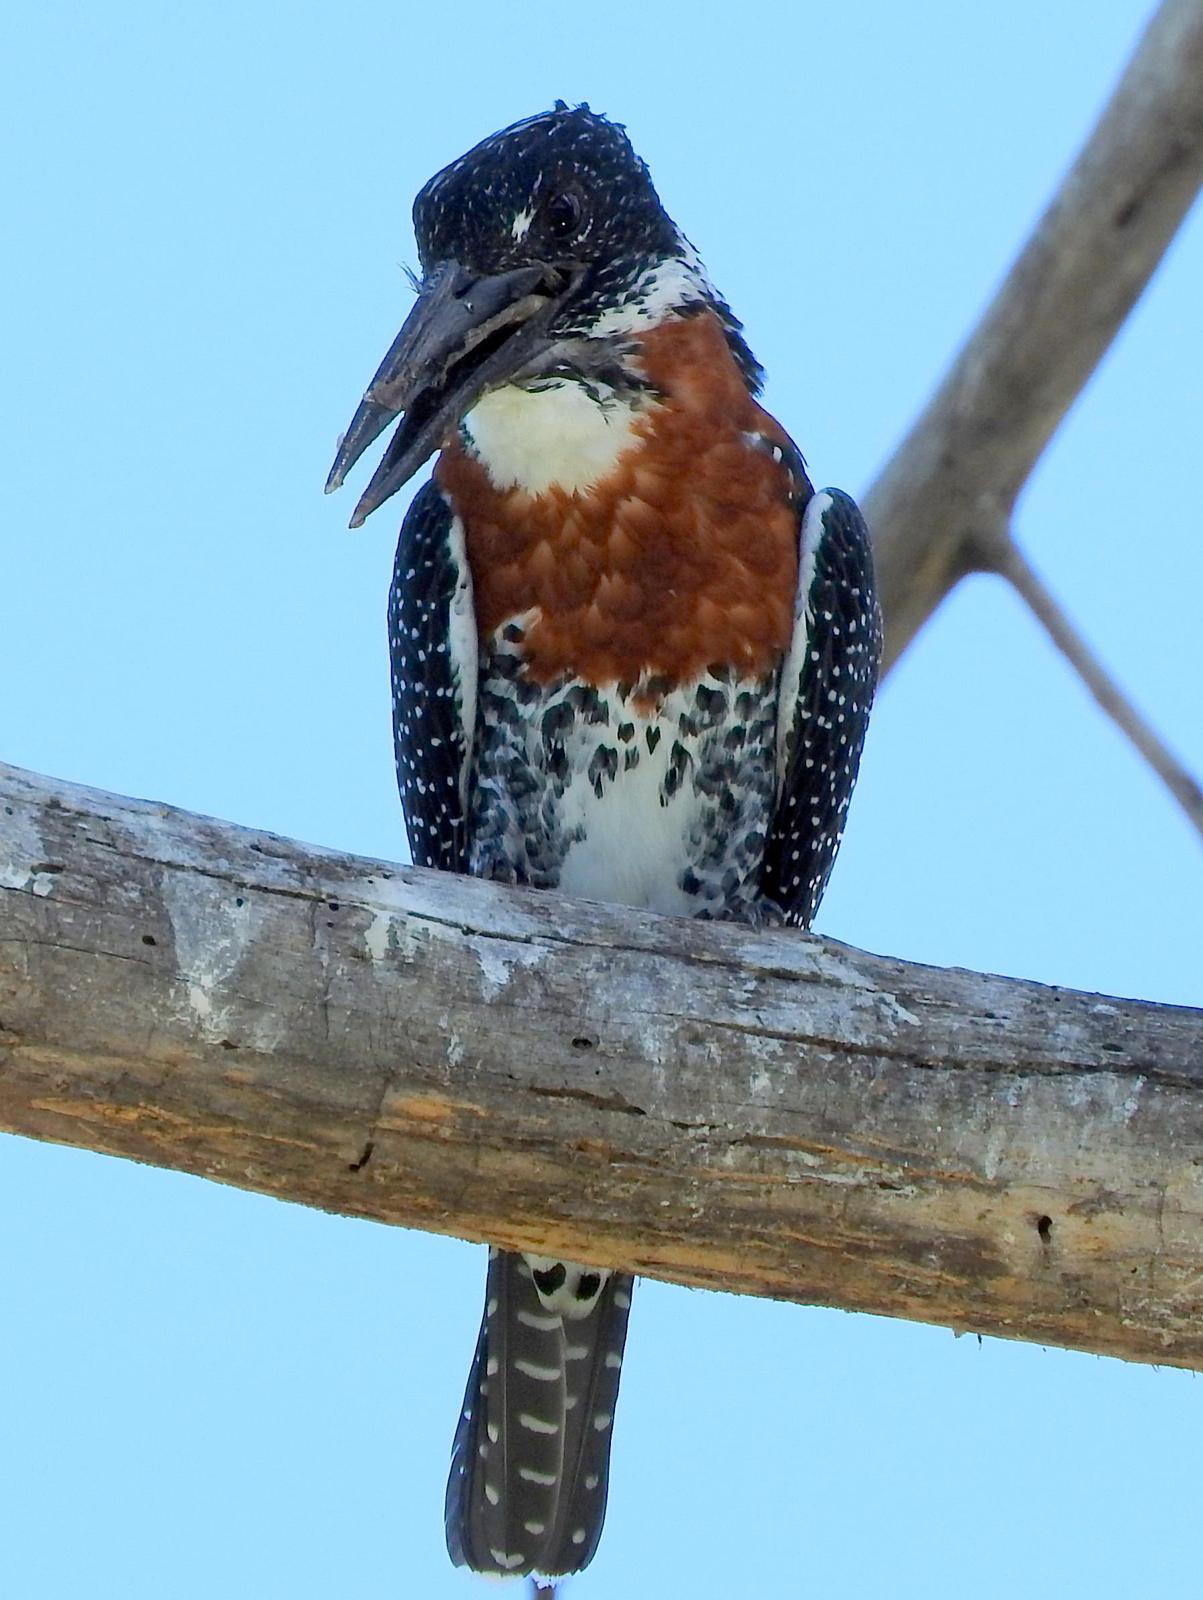 Giant Kingfisher Photo by Todd A. Watkins